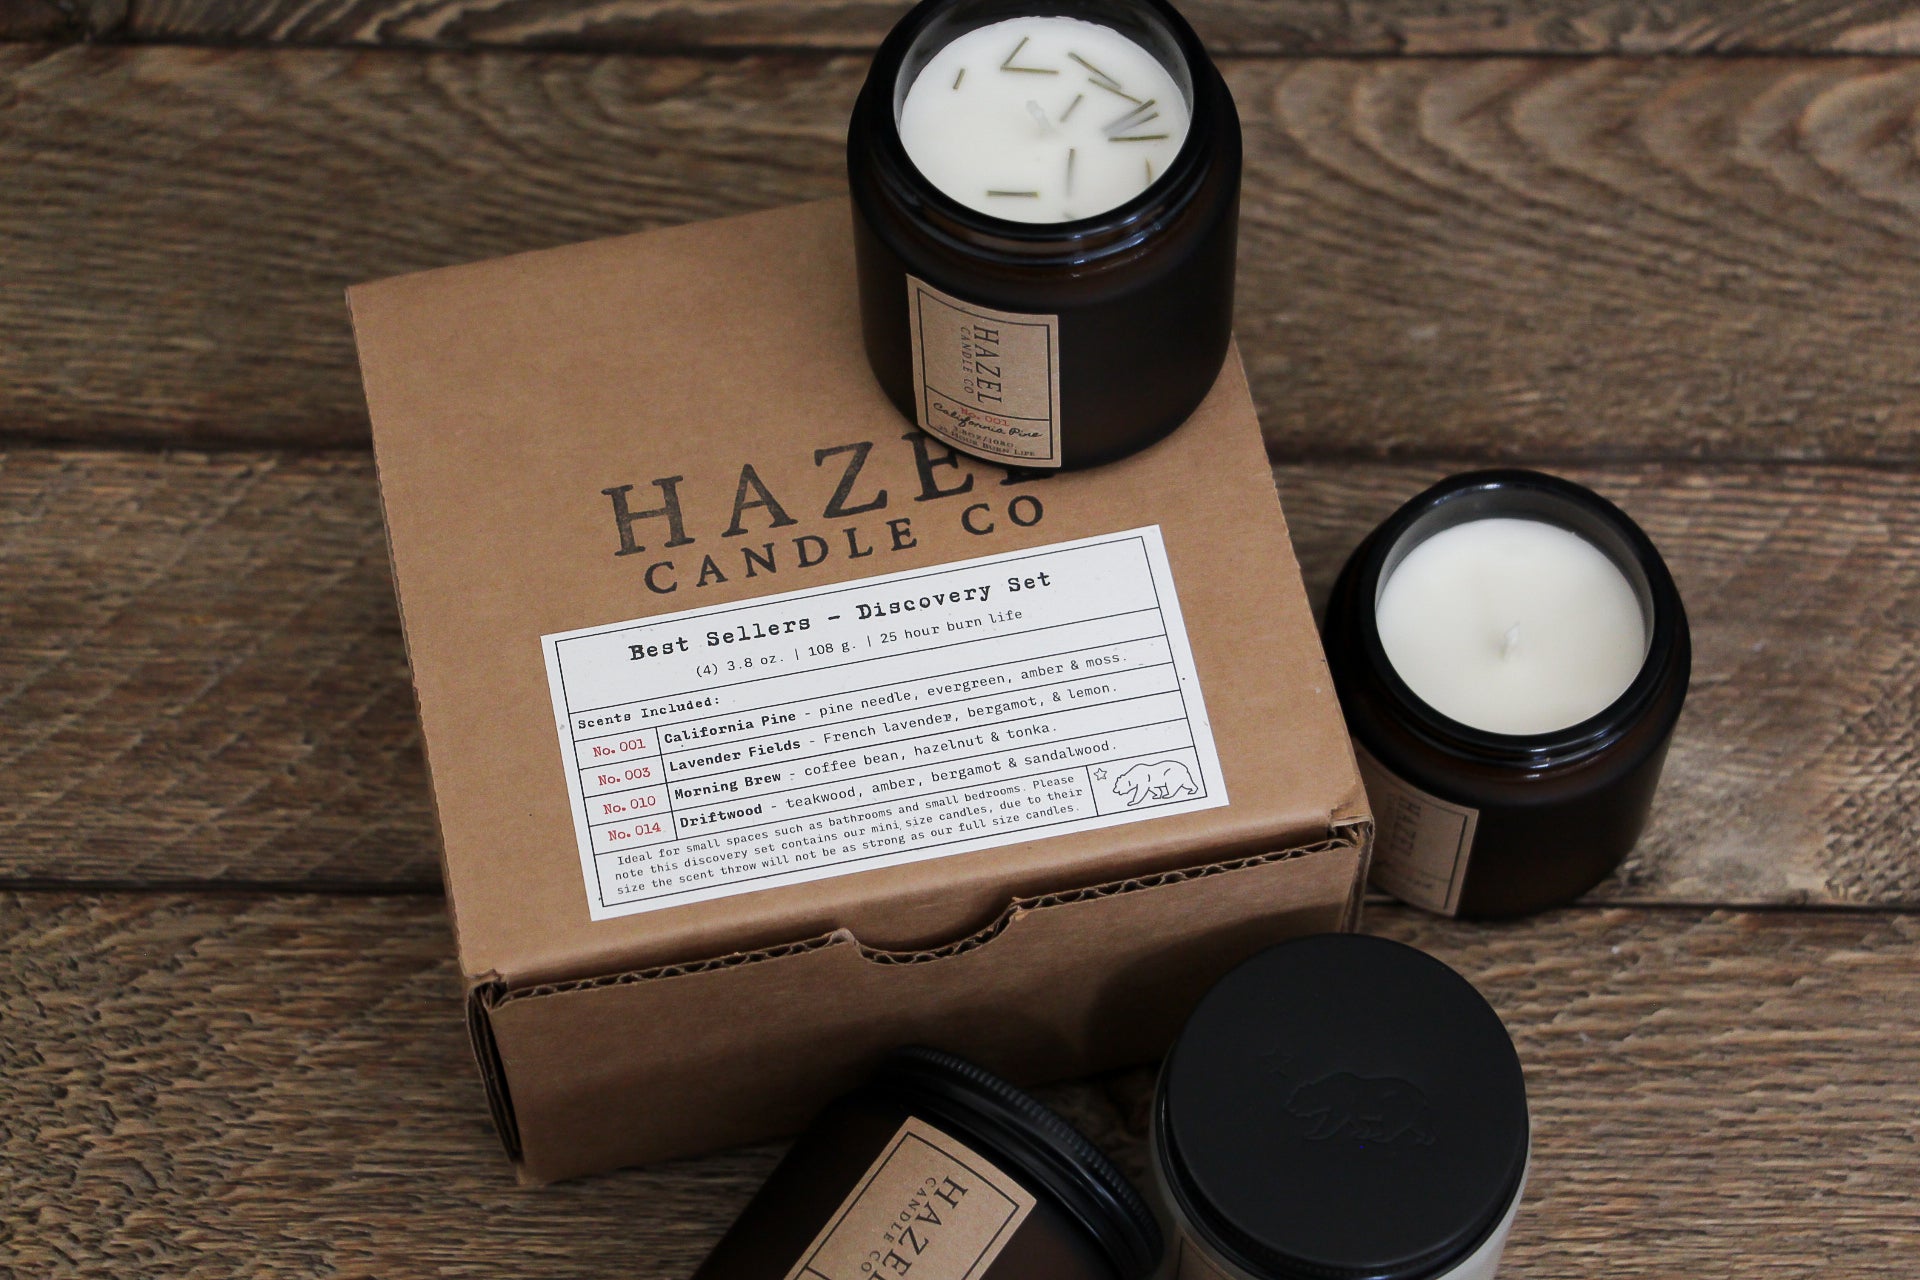 4 oz. Make your own candle kits — Colleens Candles and Gifts